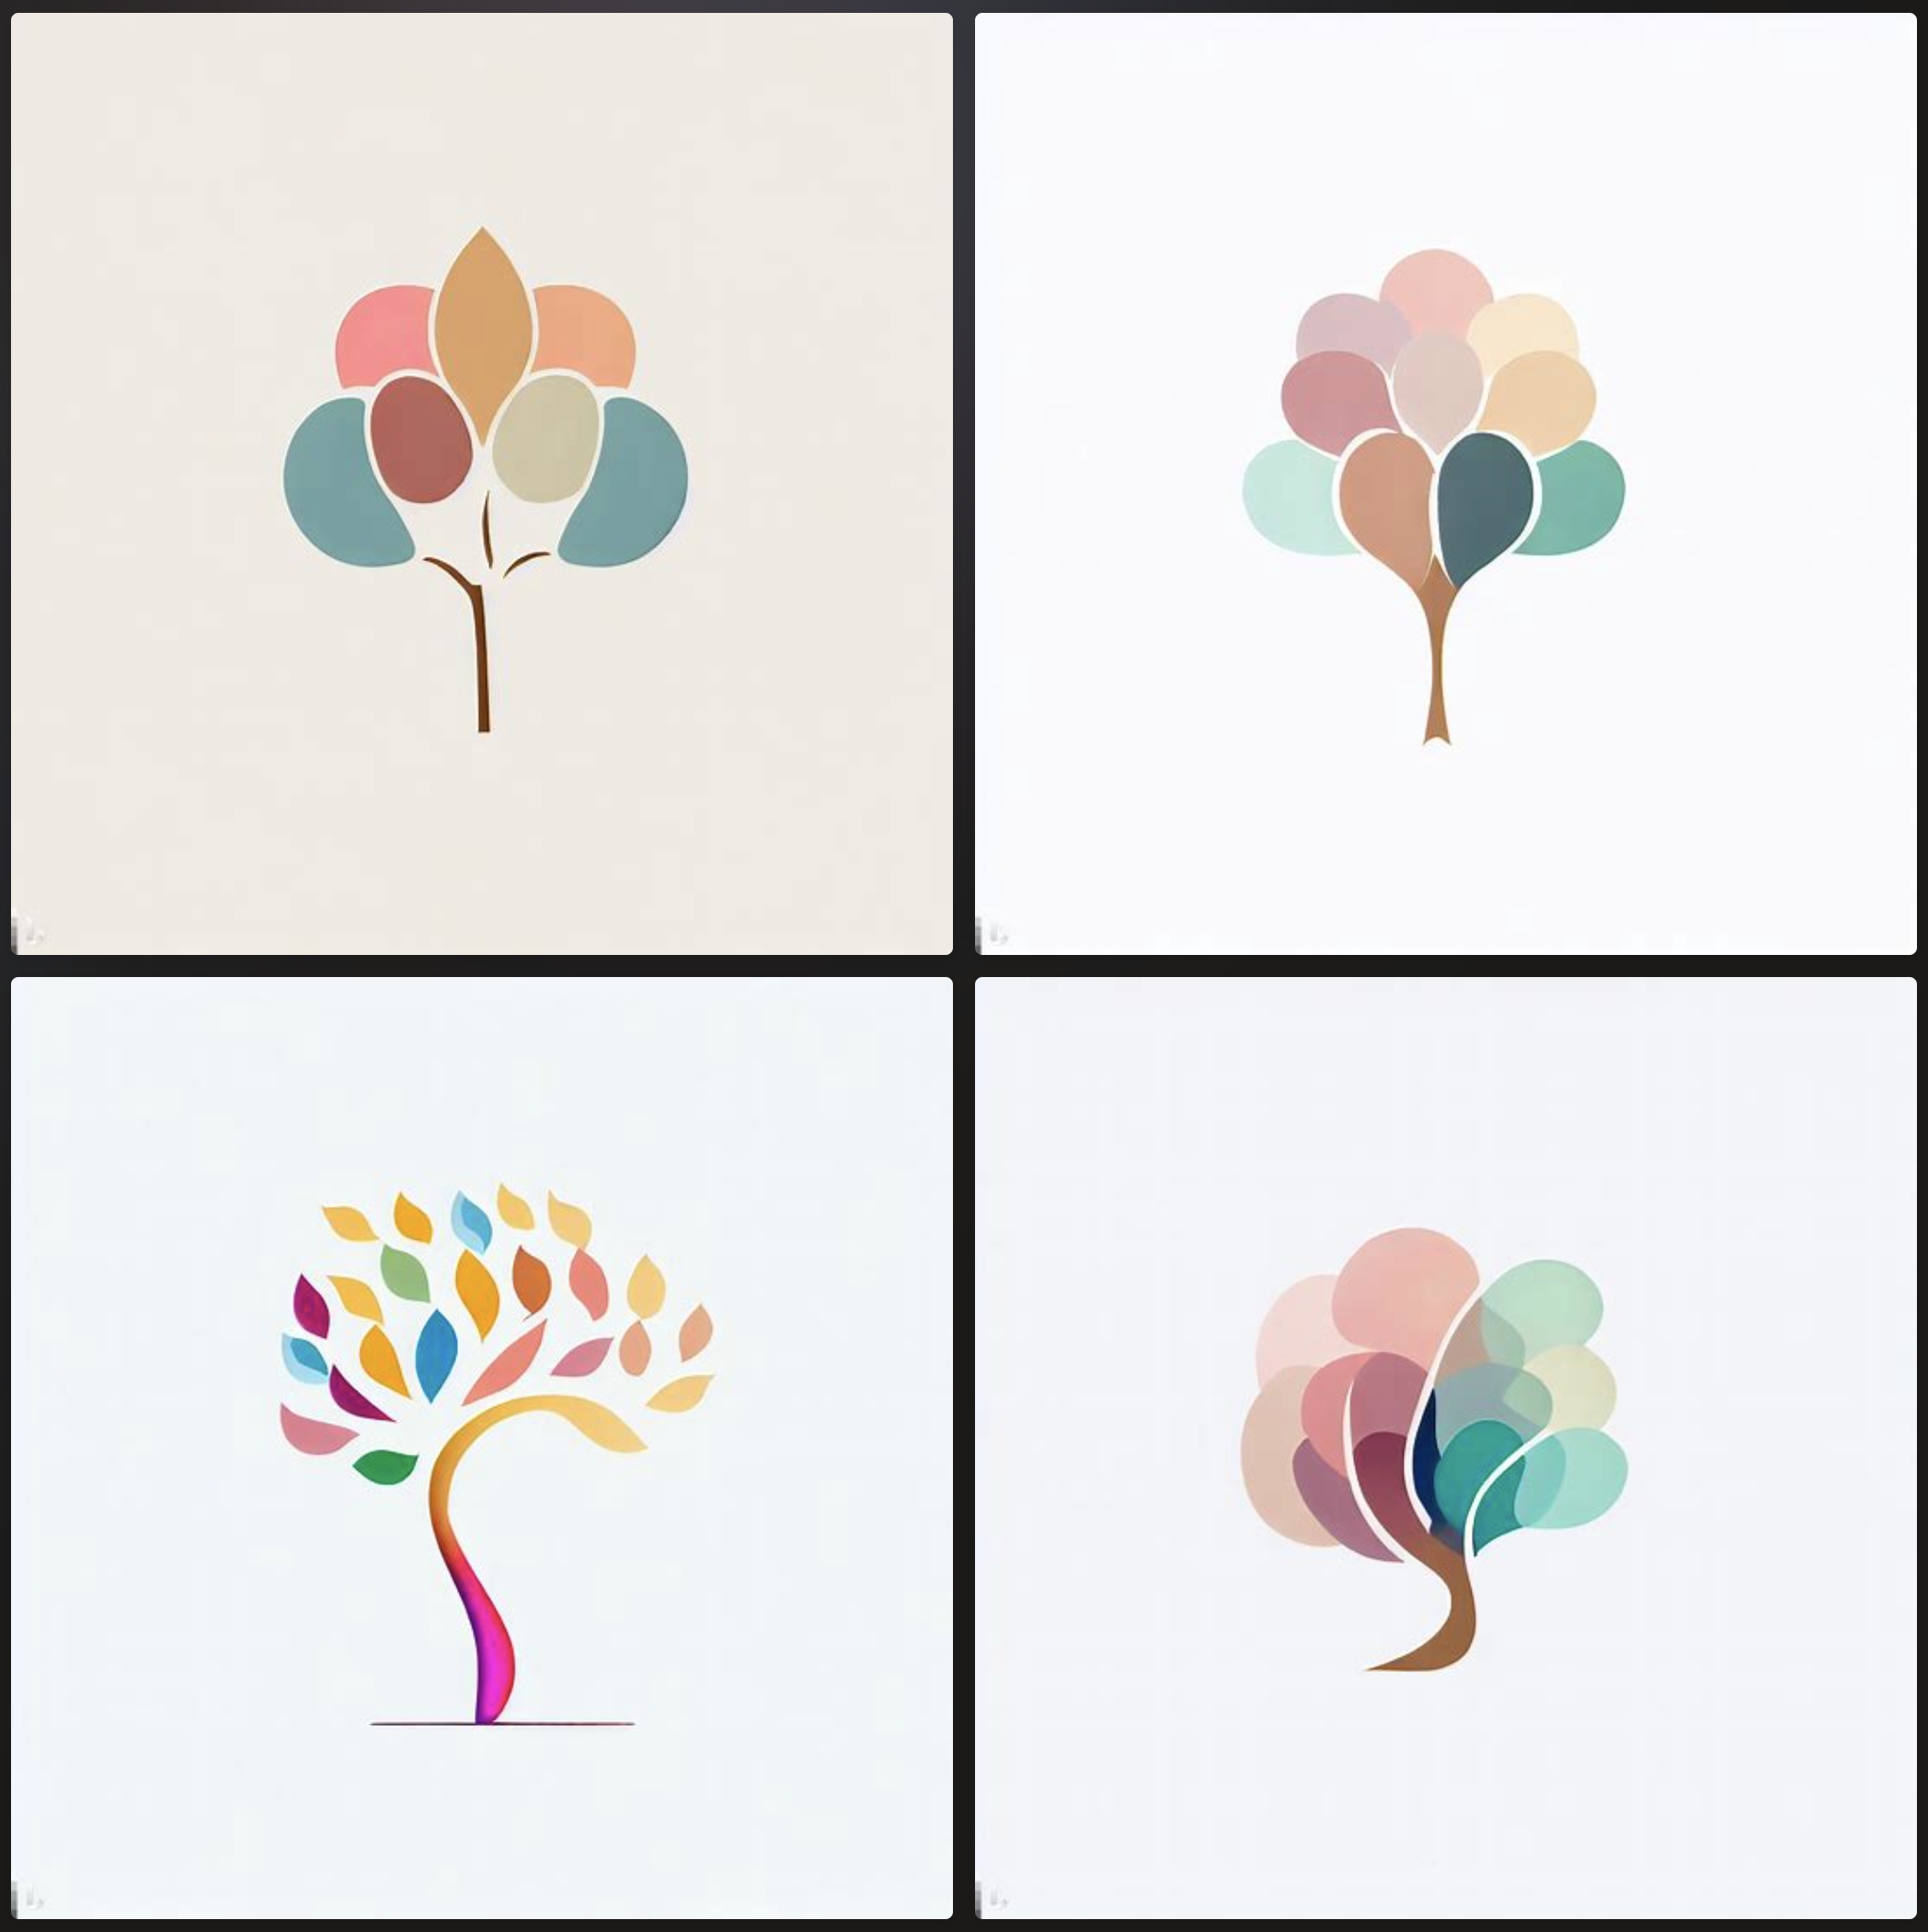 Logo for a Korean cosmetics brand, an image of a tree of different colors, a minimalist style